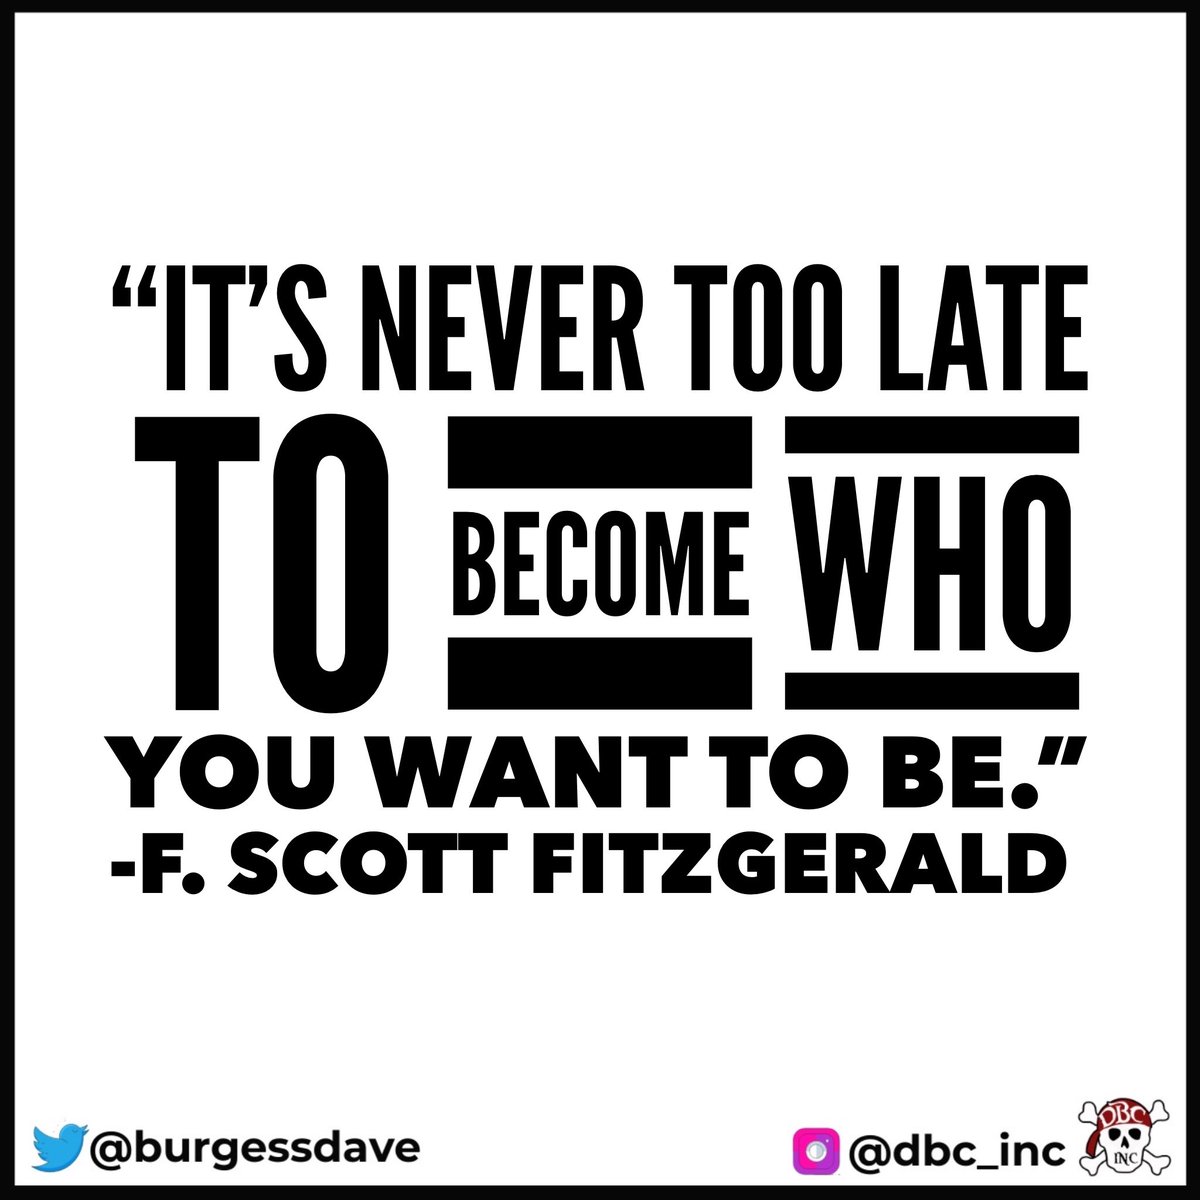 “It’s never too late to become who you want to be.” 
- F. Scott Fitzgerald

Procrastinated?
Took some wrong turns?
Failed a few times?
Let life distract you from your dreams?

It’s not too late.
Just start again.
#tlap